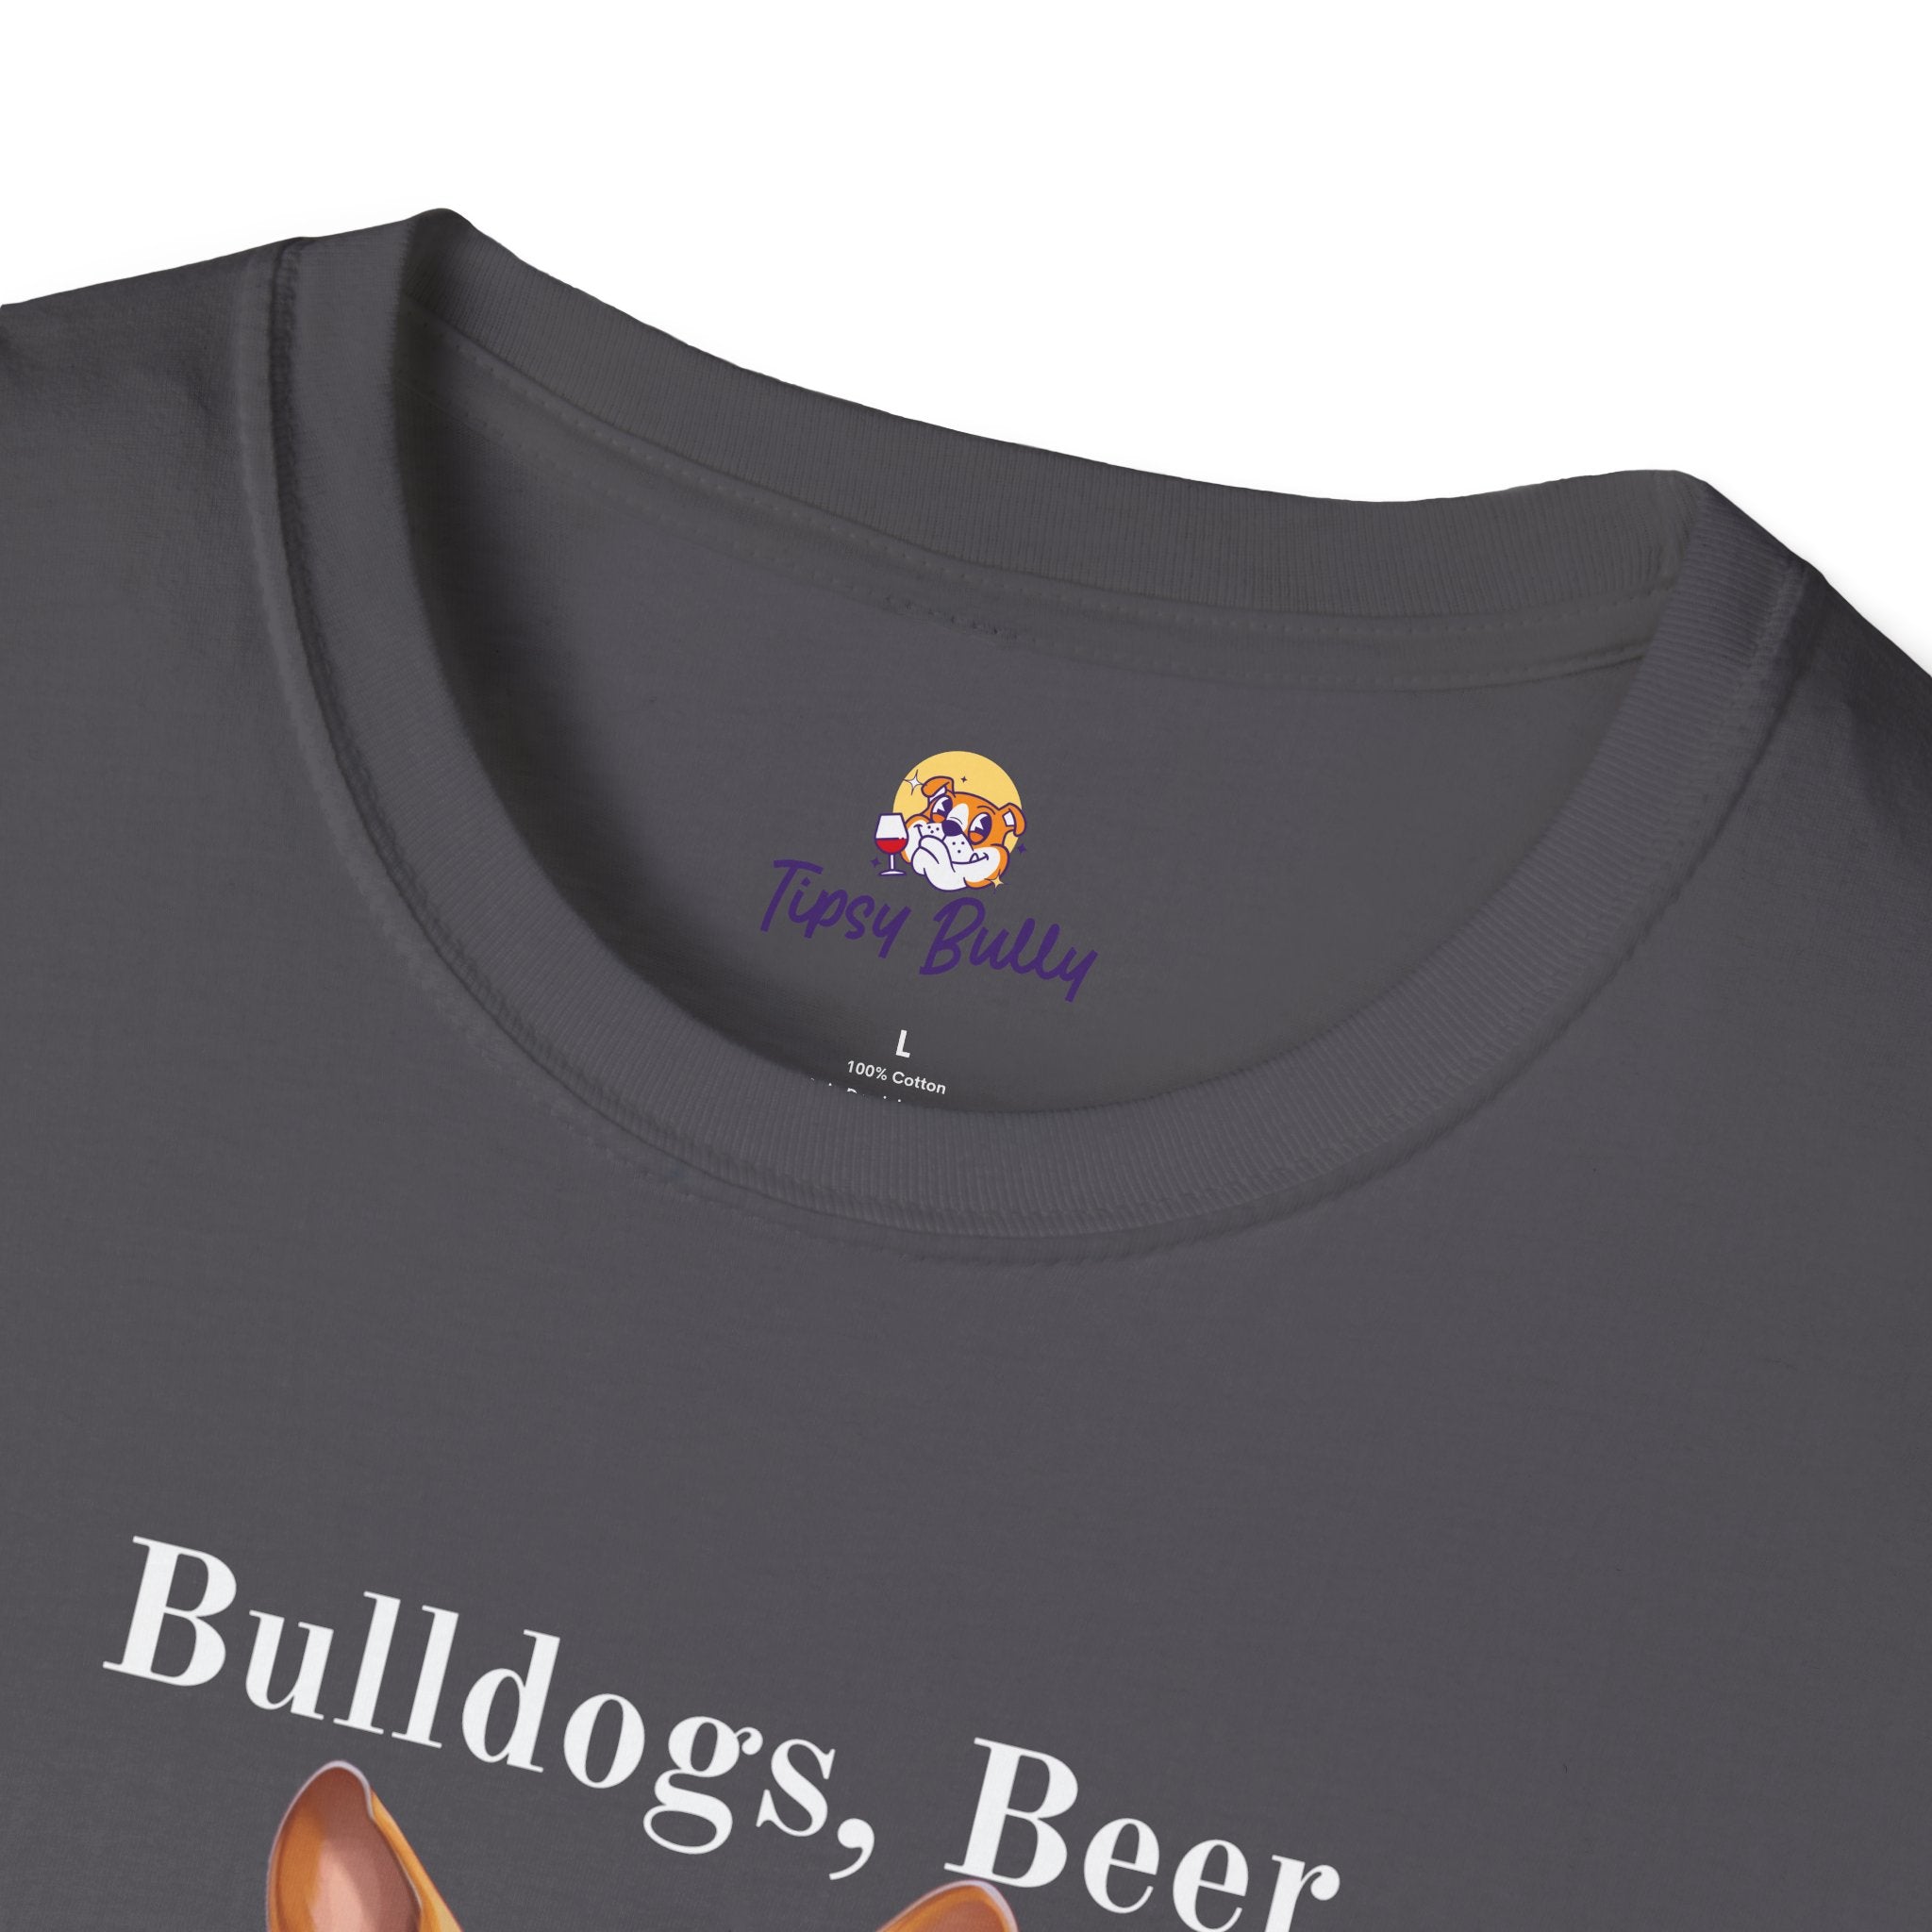 Bulldogs, Beer, and Bad Decisions" Unisex T-Shirt by Tipsy Bully (French/Brown)